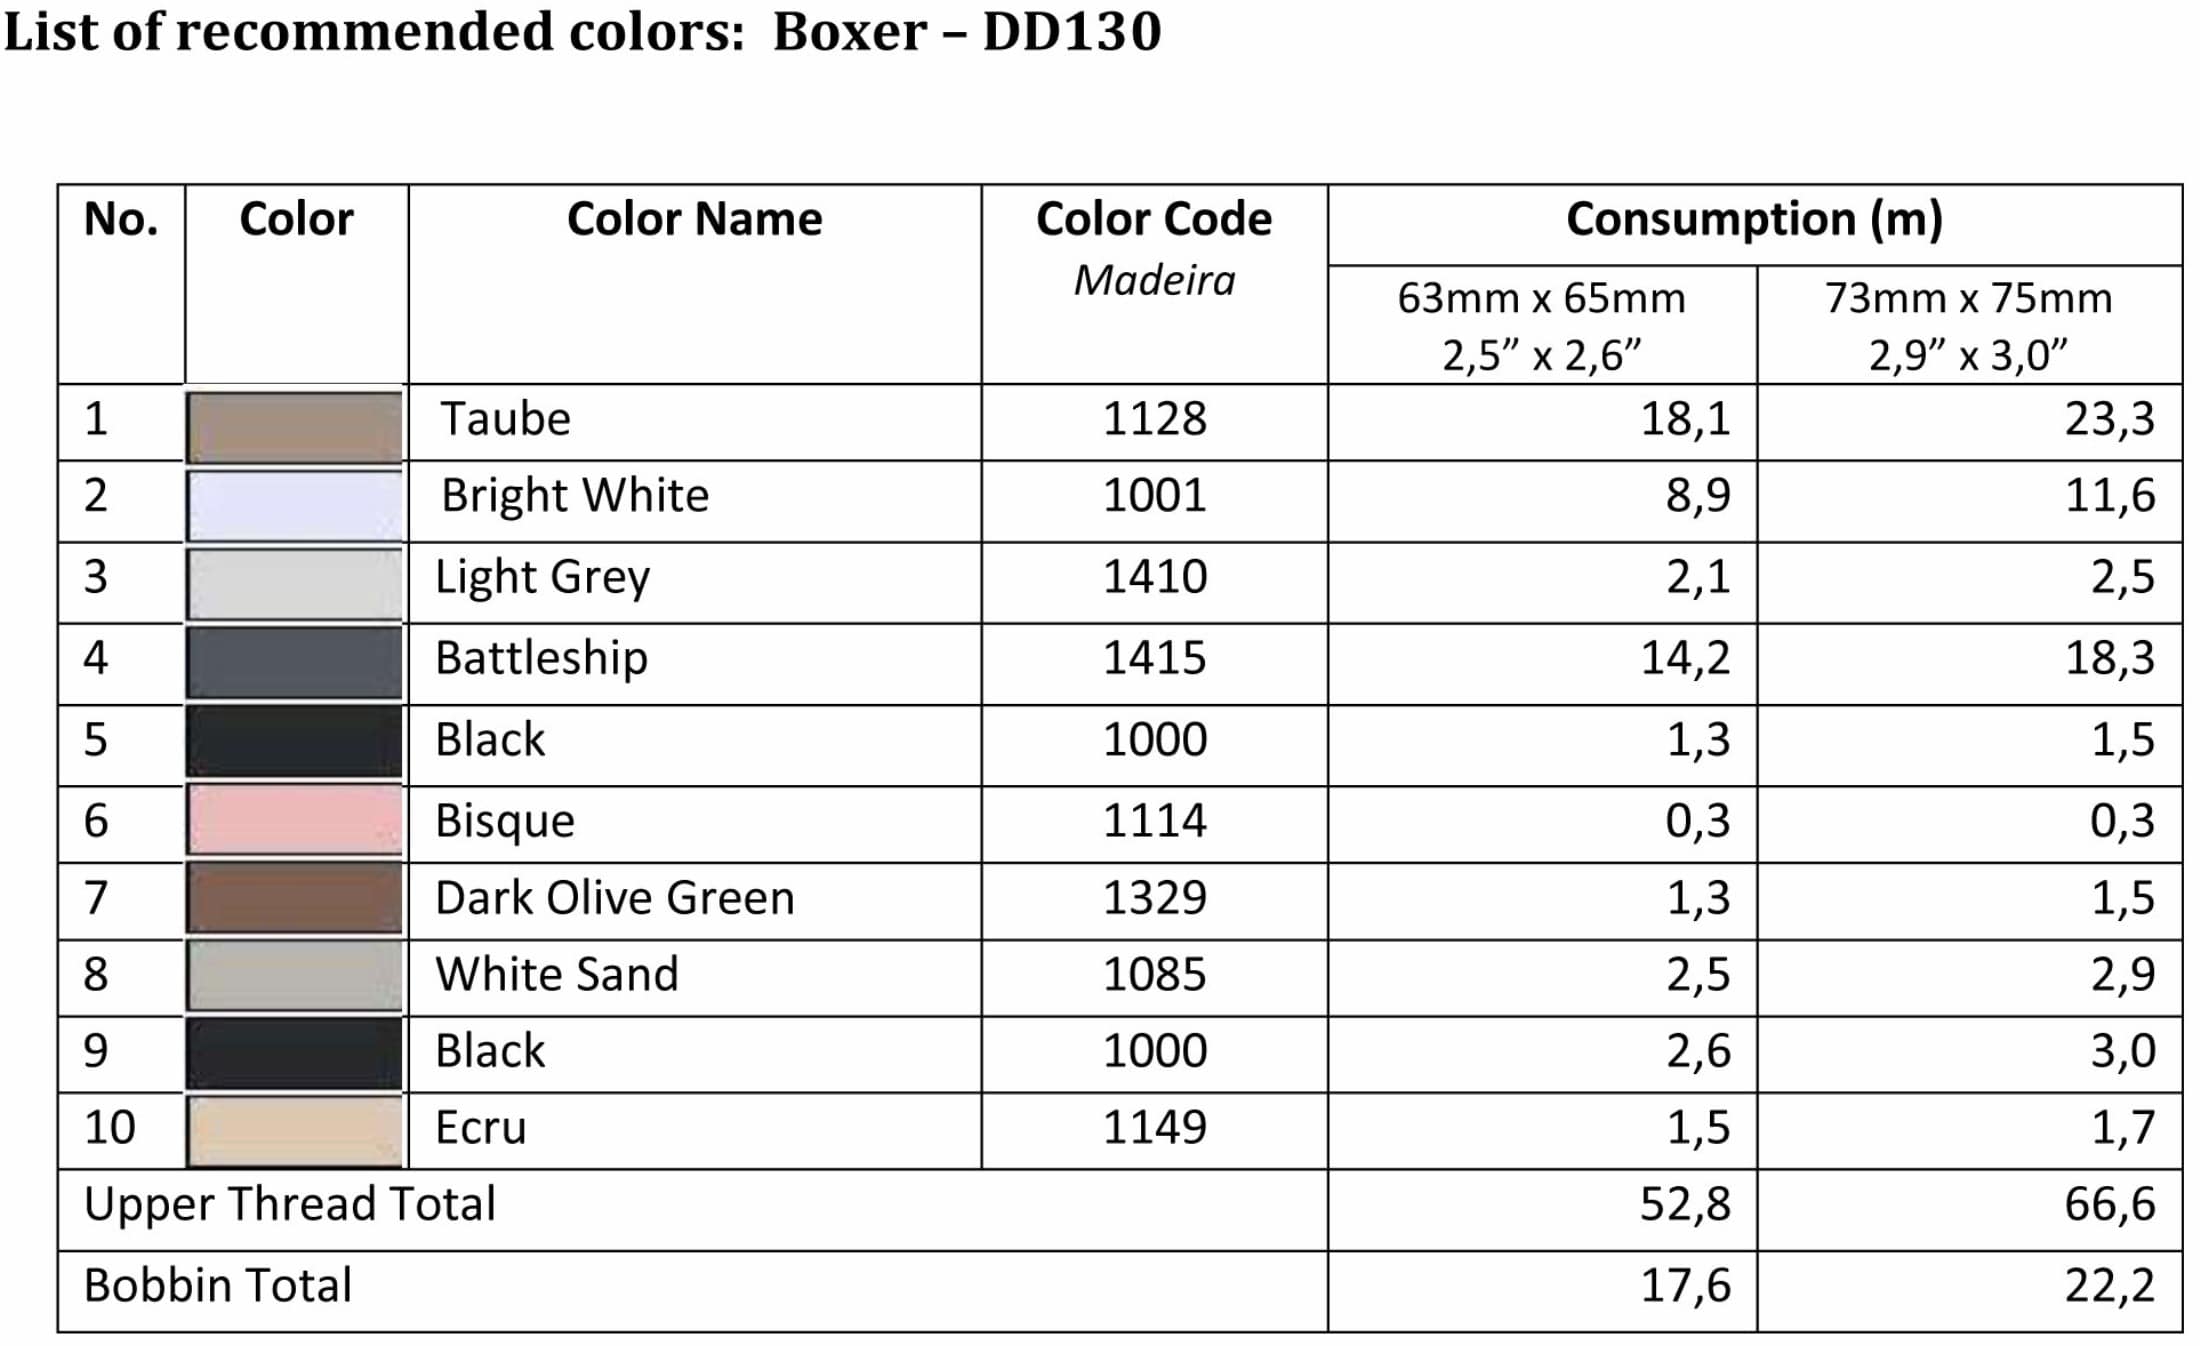 List of recommended colors - DD130